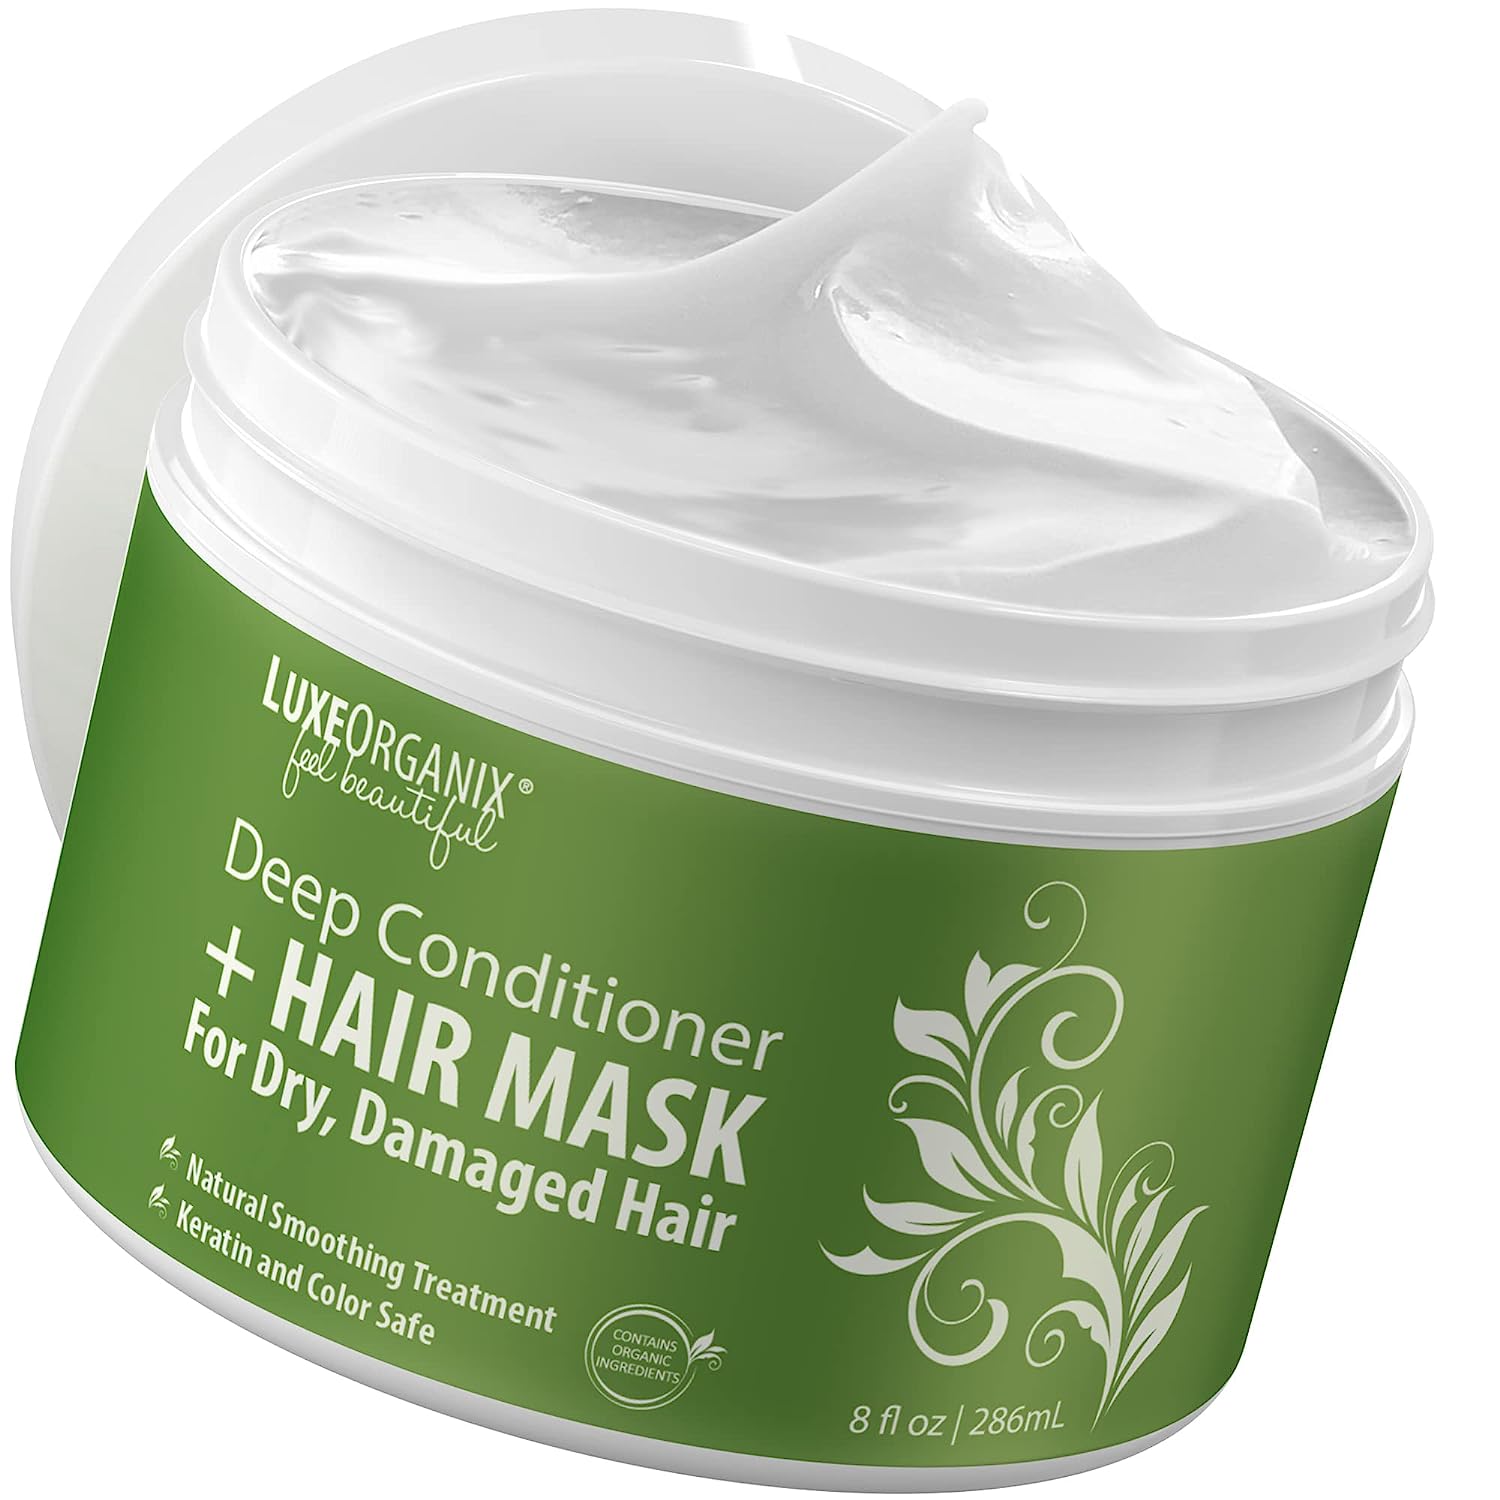 Hair Mask For Dry Damaged Hair: Takes Hair from Super- [...]